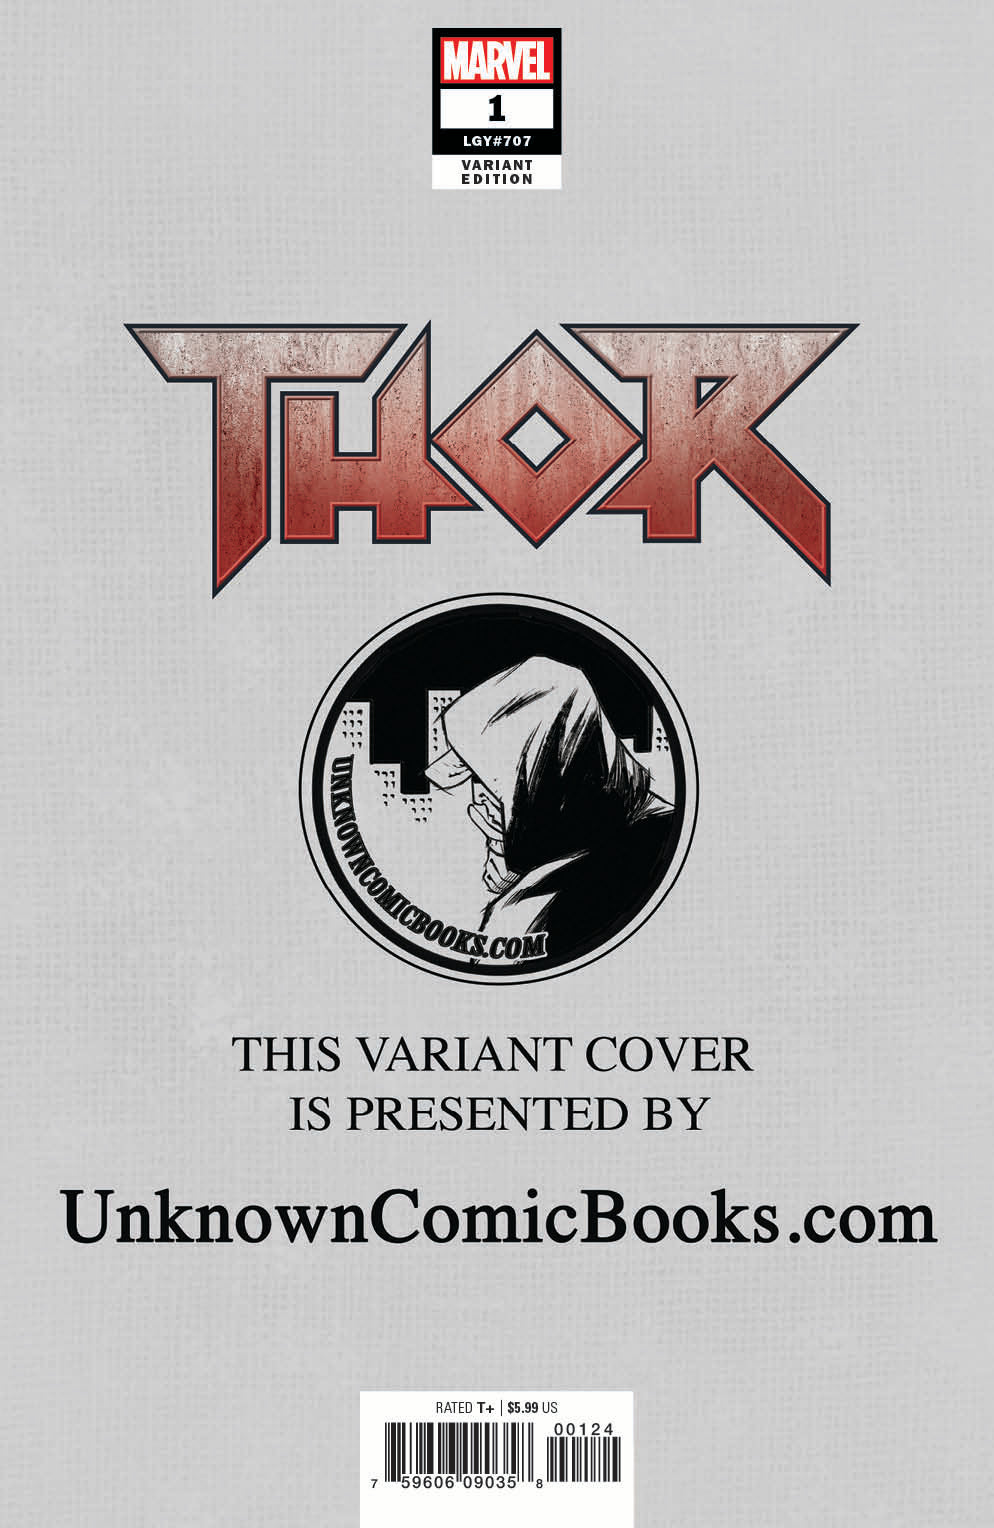 [SIGNED BY KAARE ANDREWS] THOR #1 ANDREWS CONNECTING PARTY UCB EXCLUSIVE VIRGIN VAR [CGC 9.6+ YELLOW LABEL] (11/27/2024)